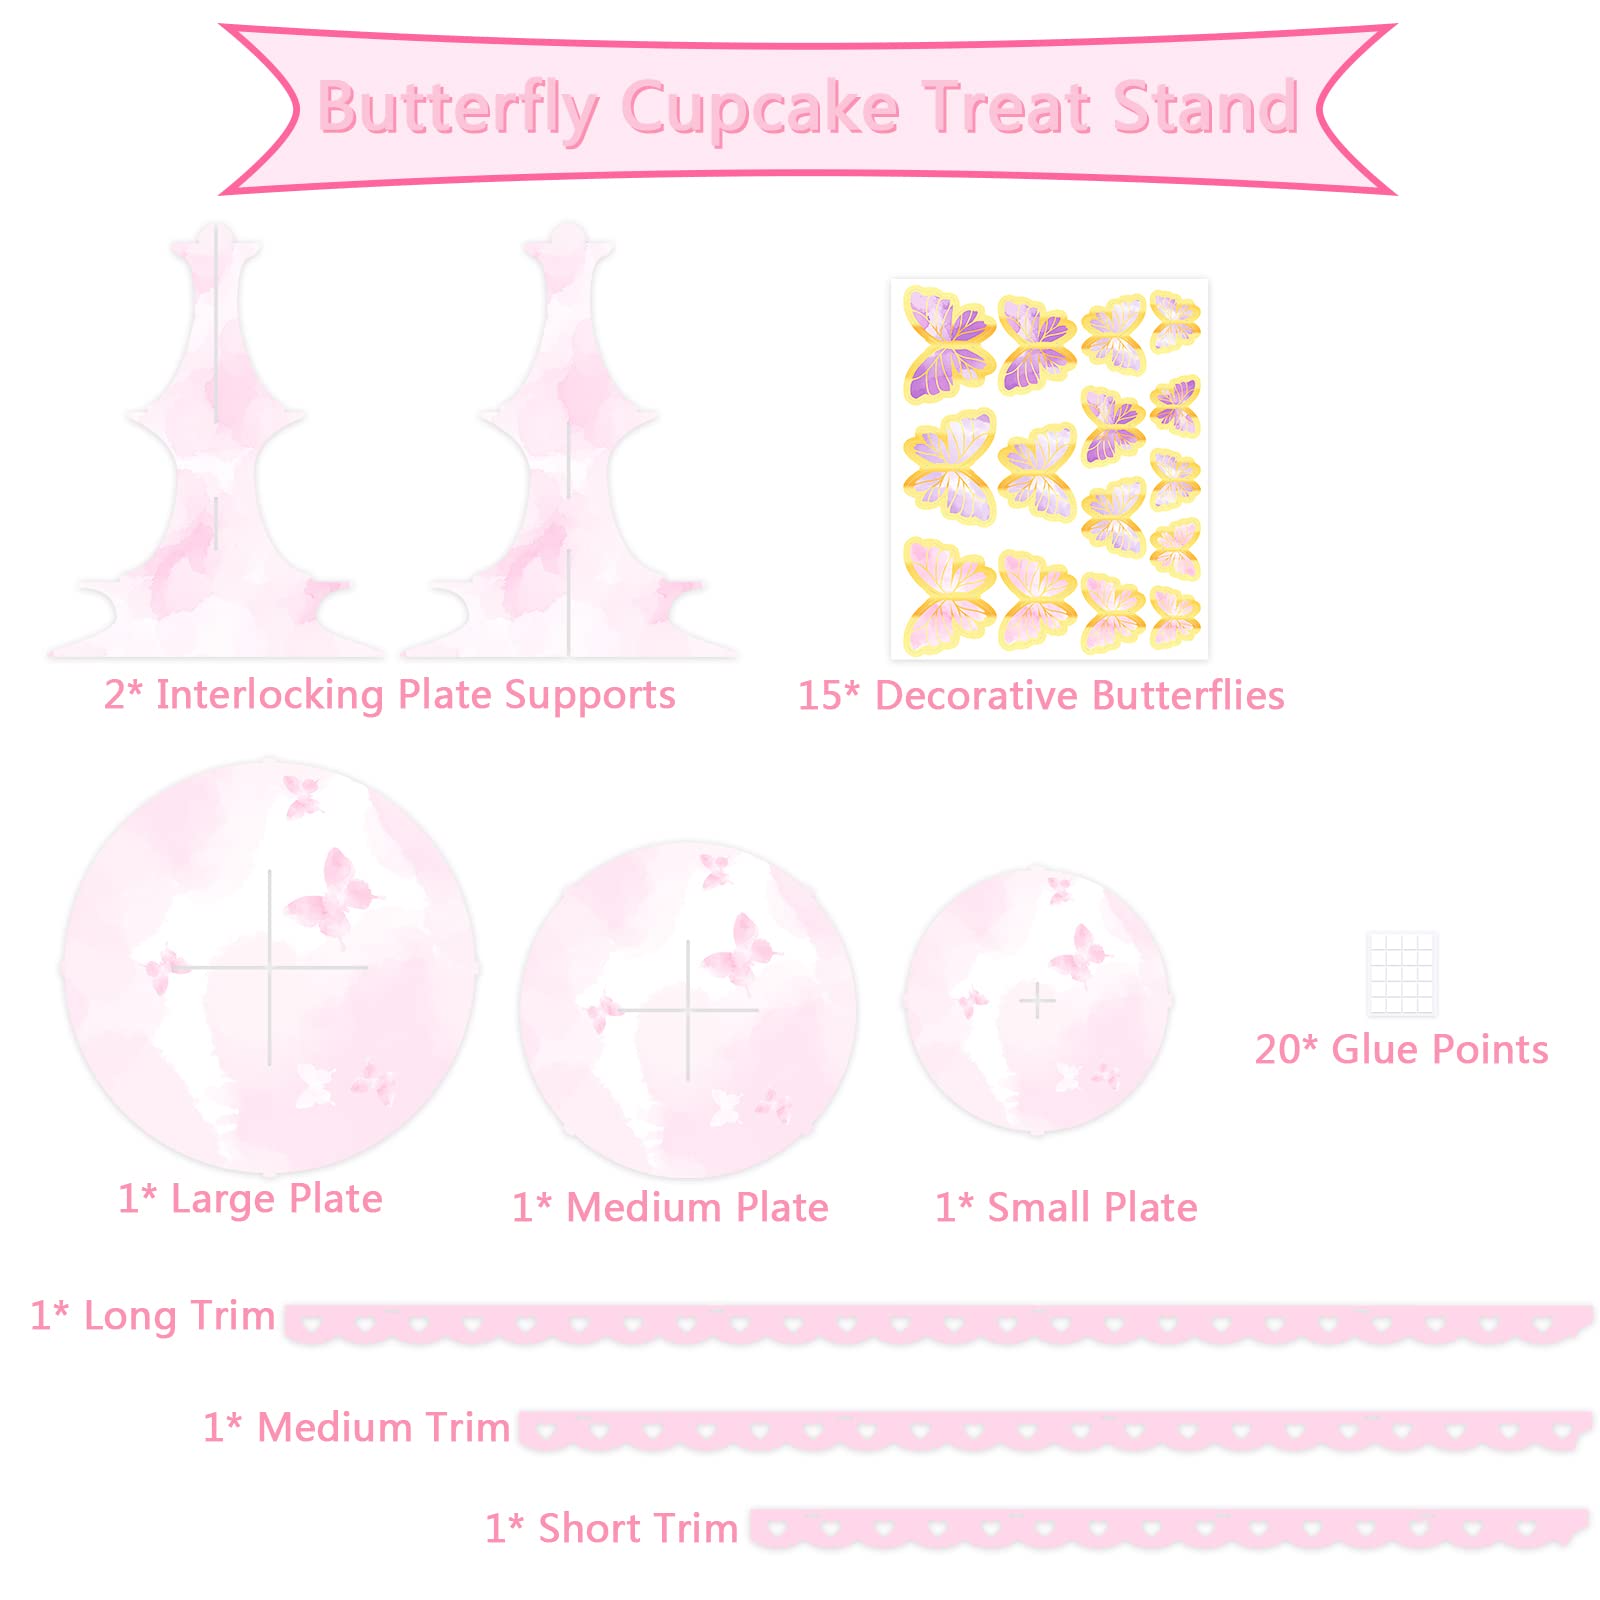 WEEPA Butterfly Cupcake Stand Birthday Party Supplies 3-Tier Round Cupcake Stand DIY Pink Cake Stand Display Table for Theme Party Birthday Baby Shower Wedding